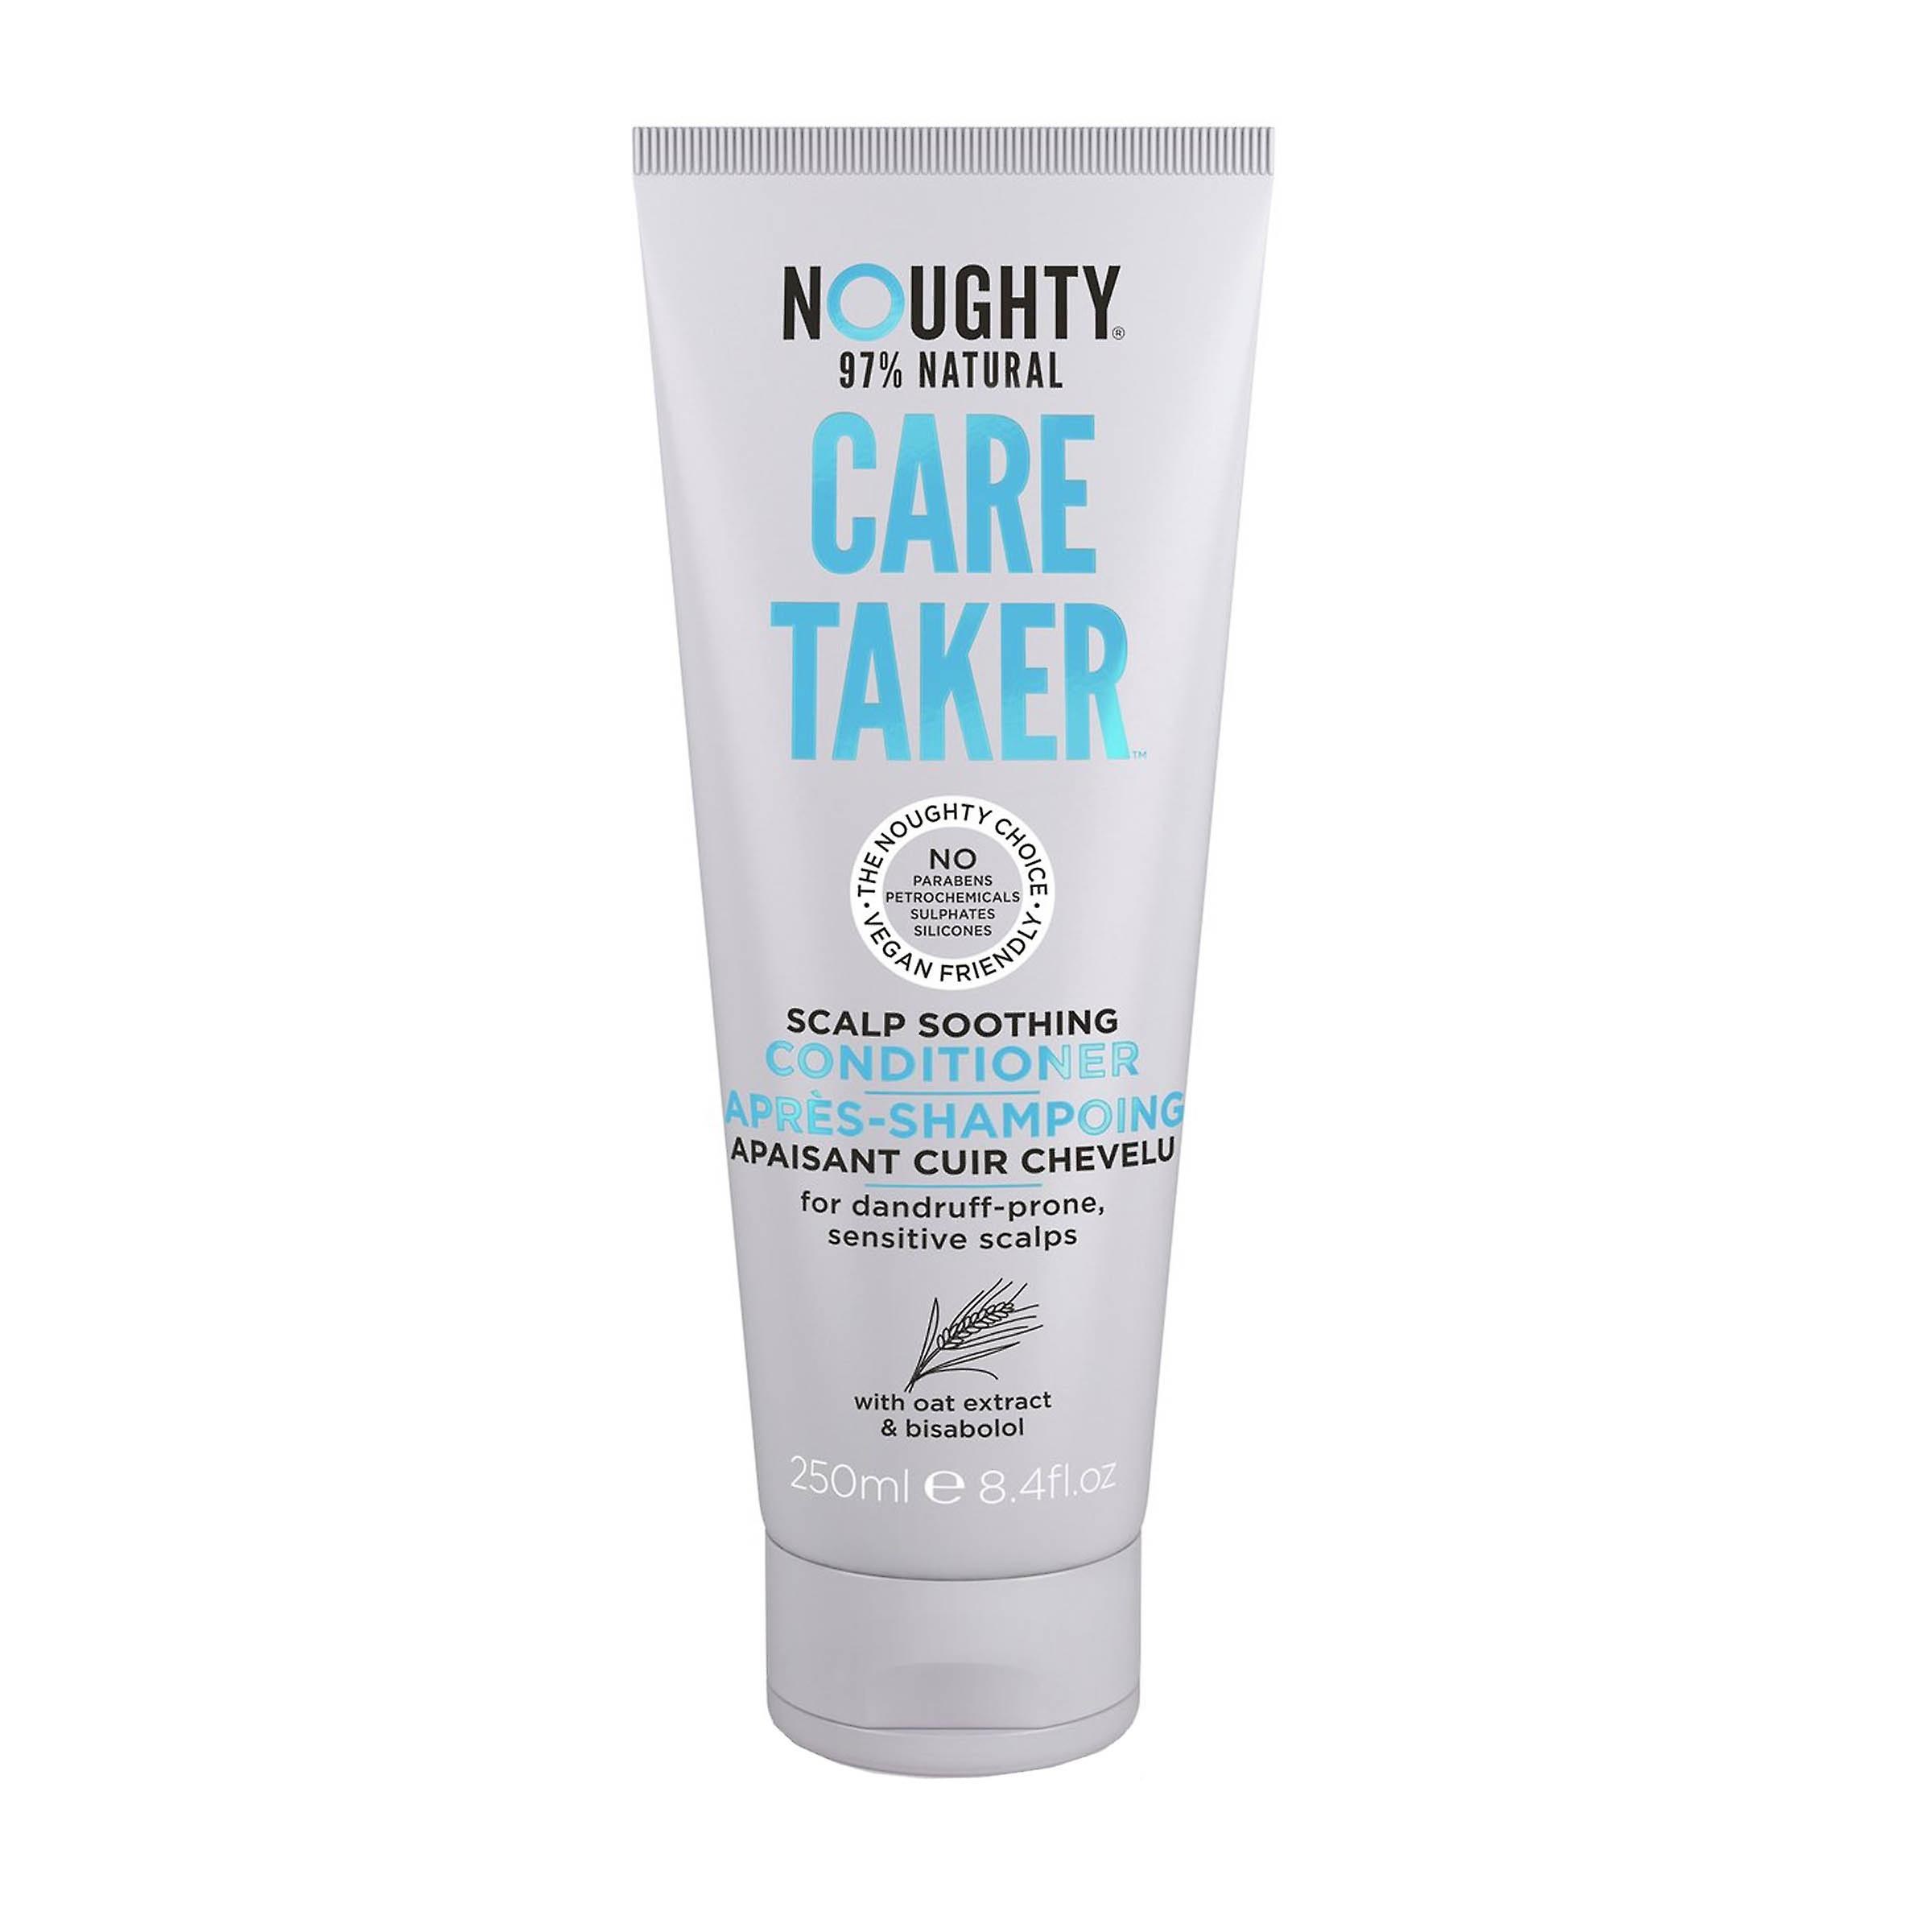 Noughty Care Taker Conditioner 250 ml